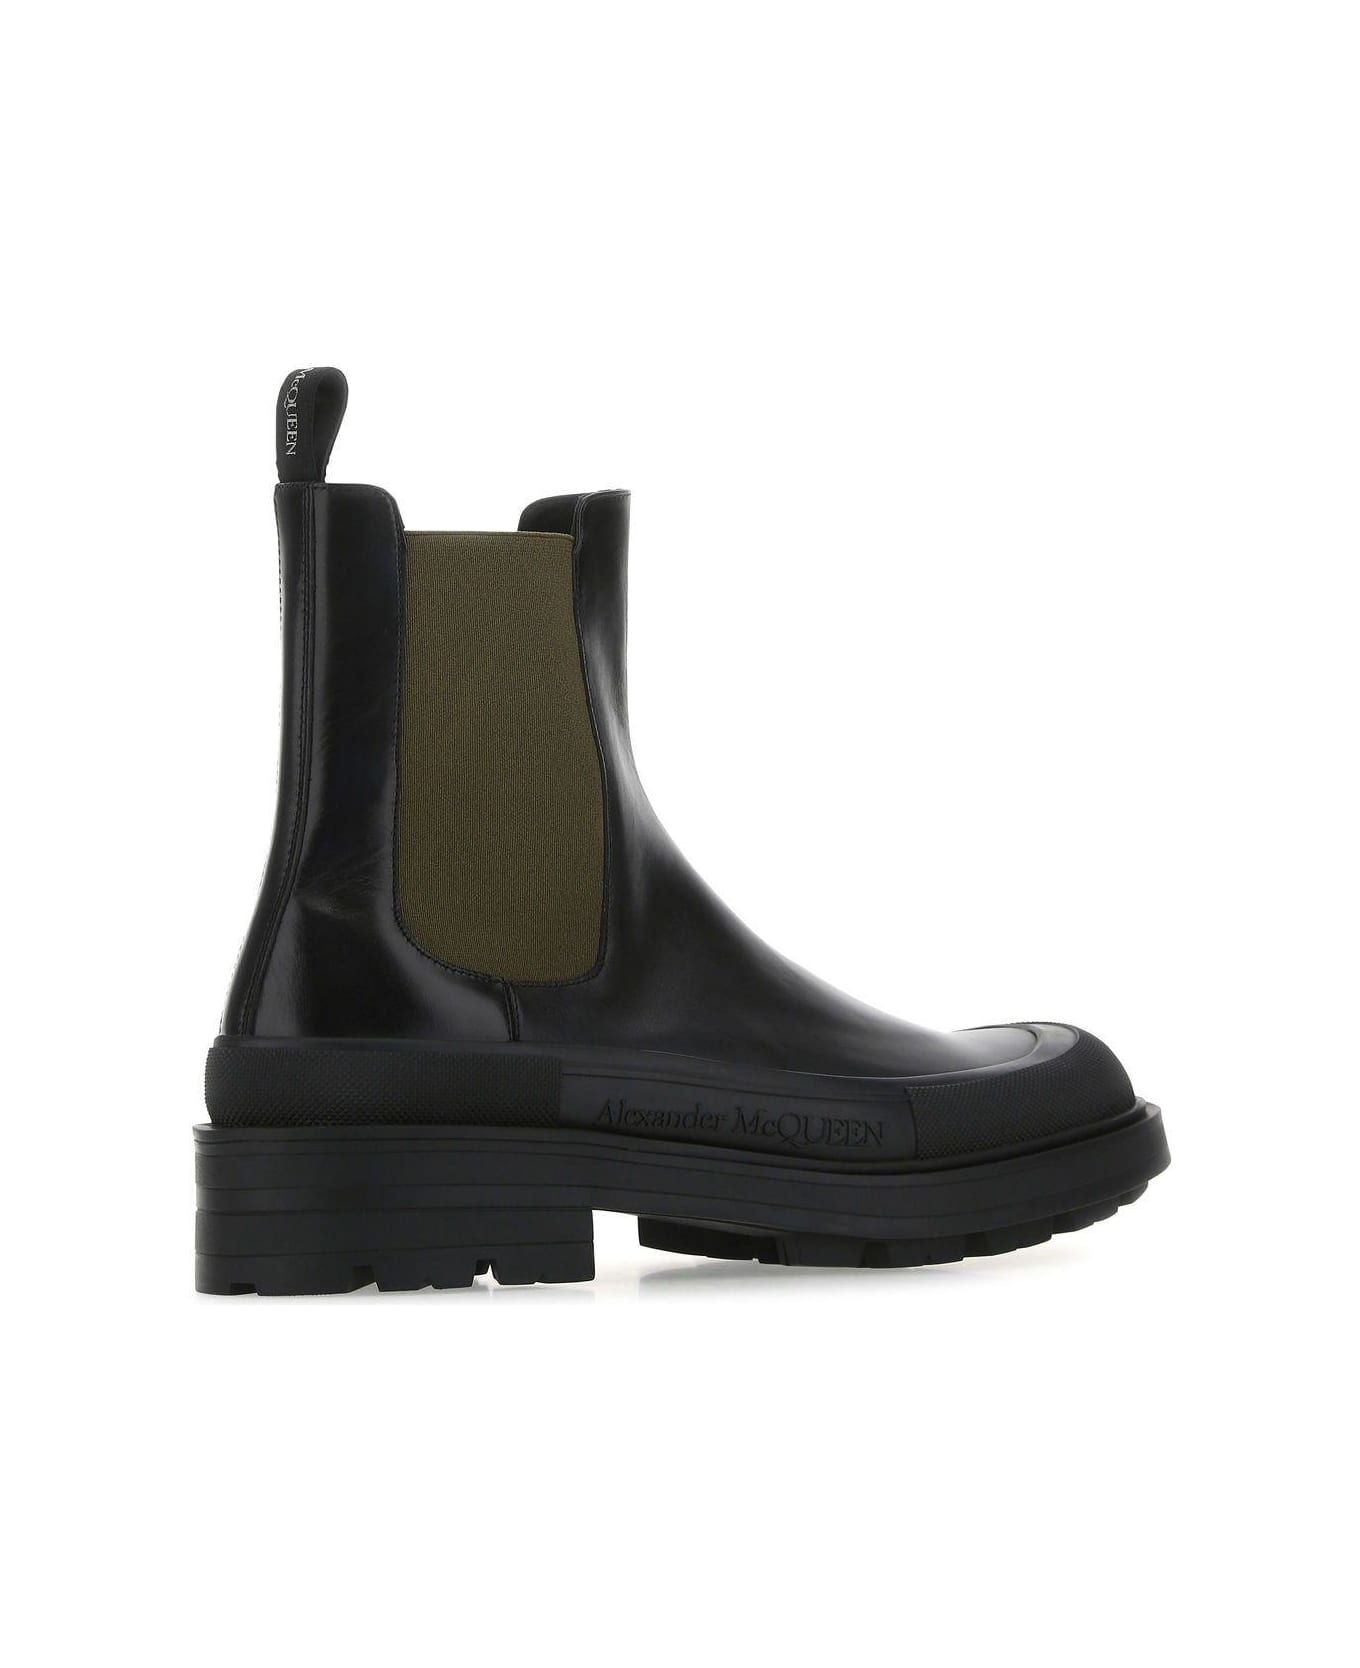 Alexander McQueen Black Leather Boxcar Ankle Boots - BLACK